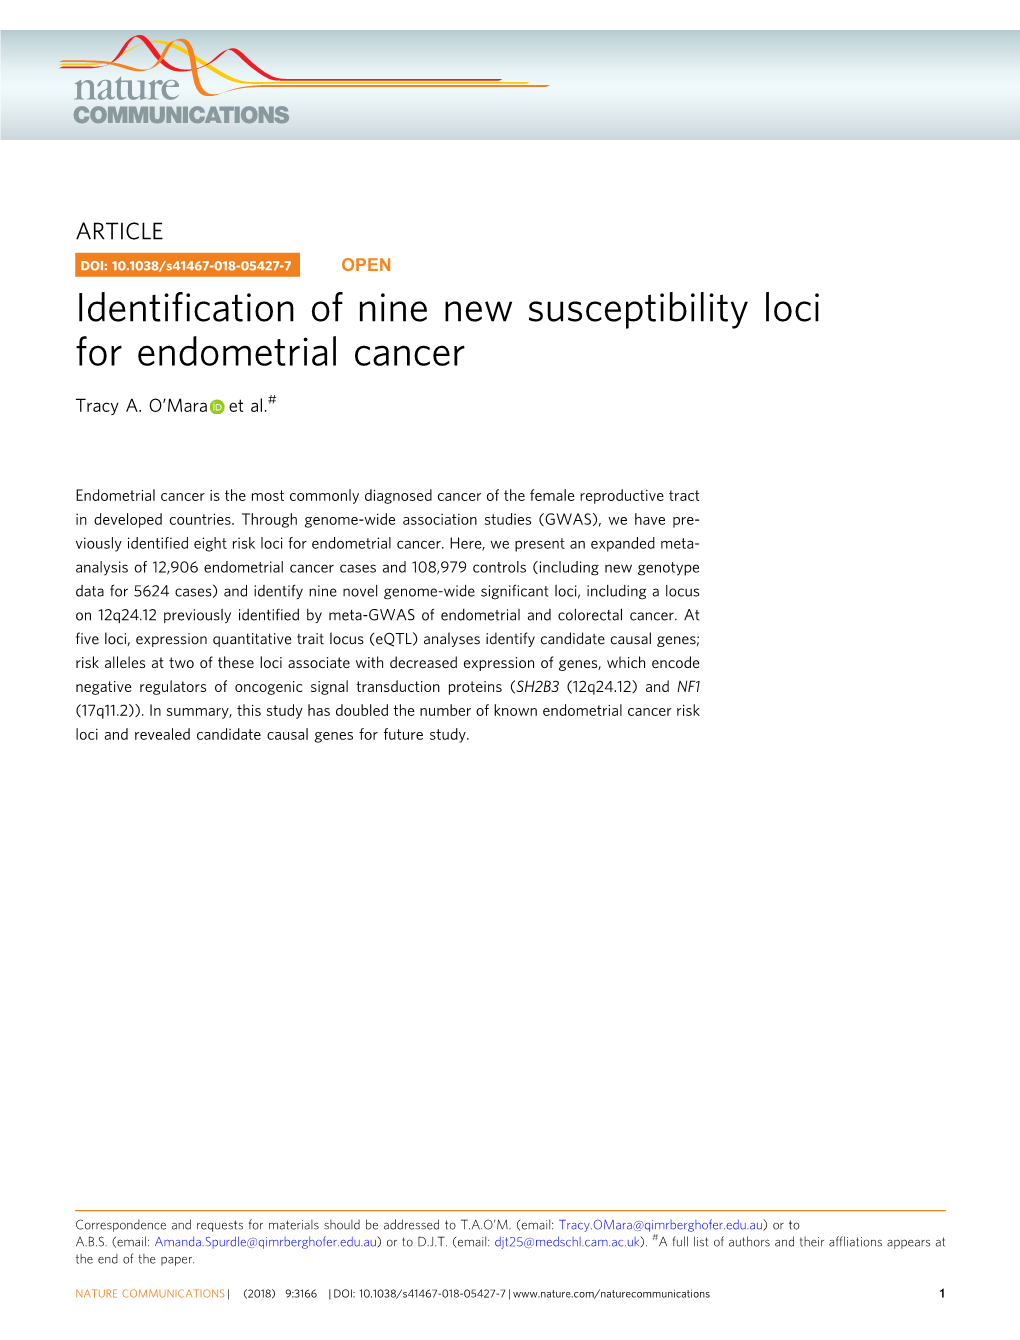 Identification of Nine New Susceptibility Loci for Endometrial Cancer